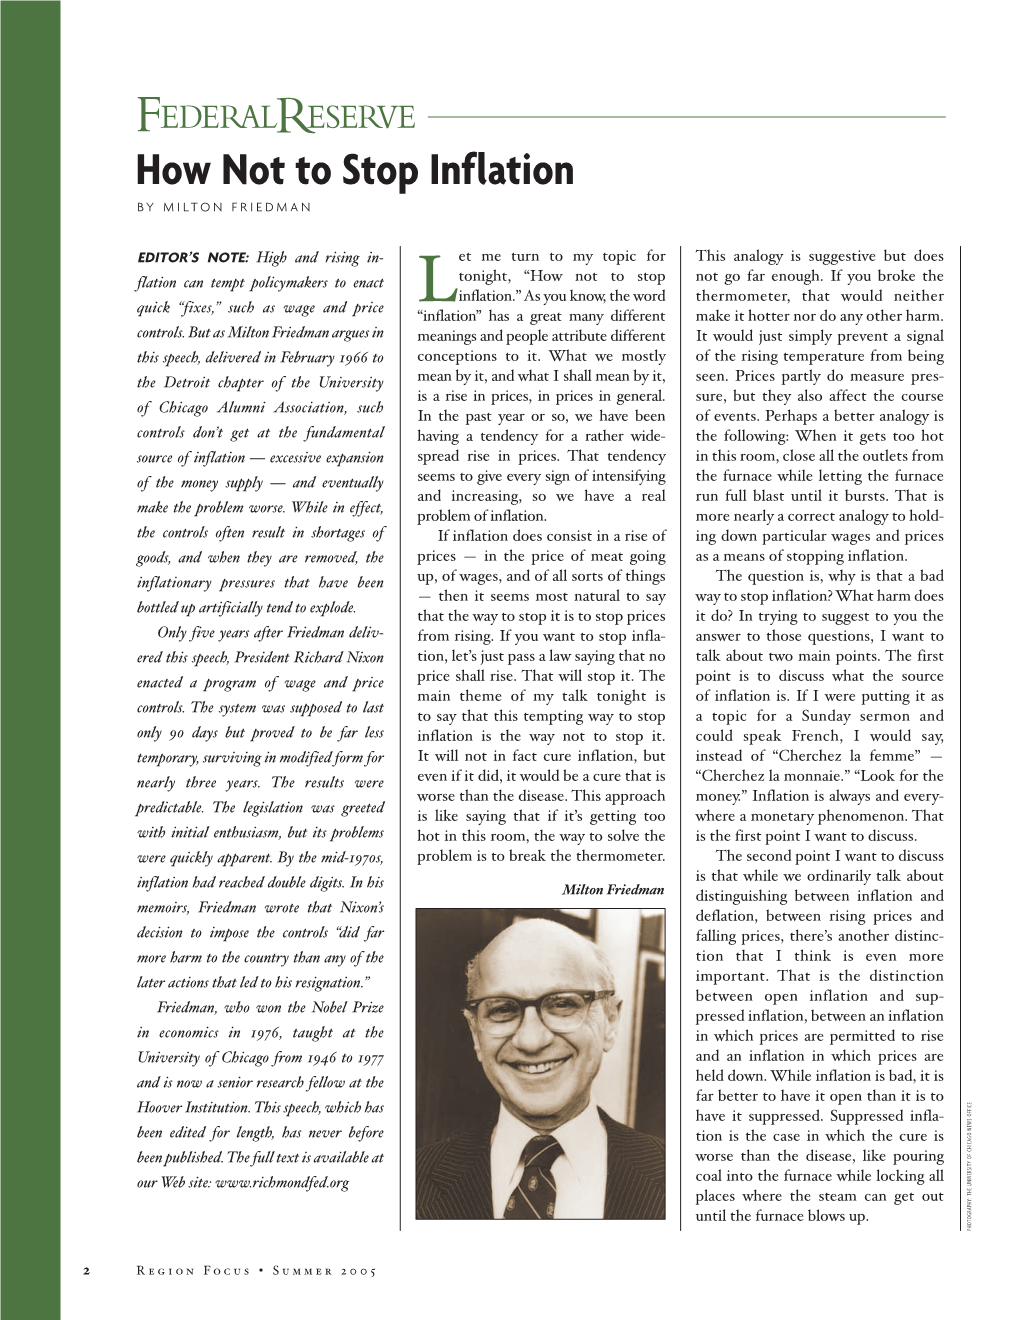 How Not to Stop Inflation by MILTON FRIEDMAN